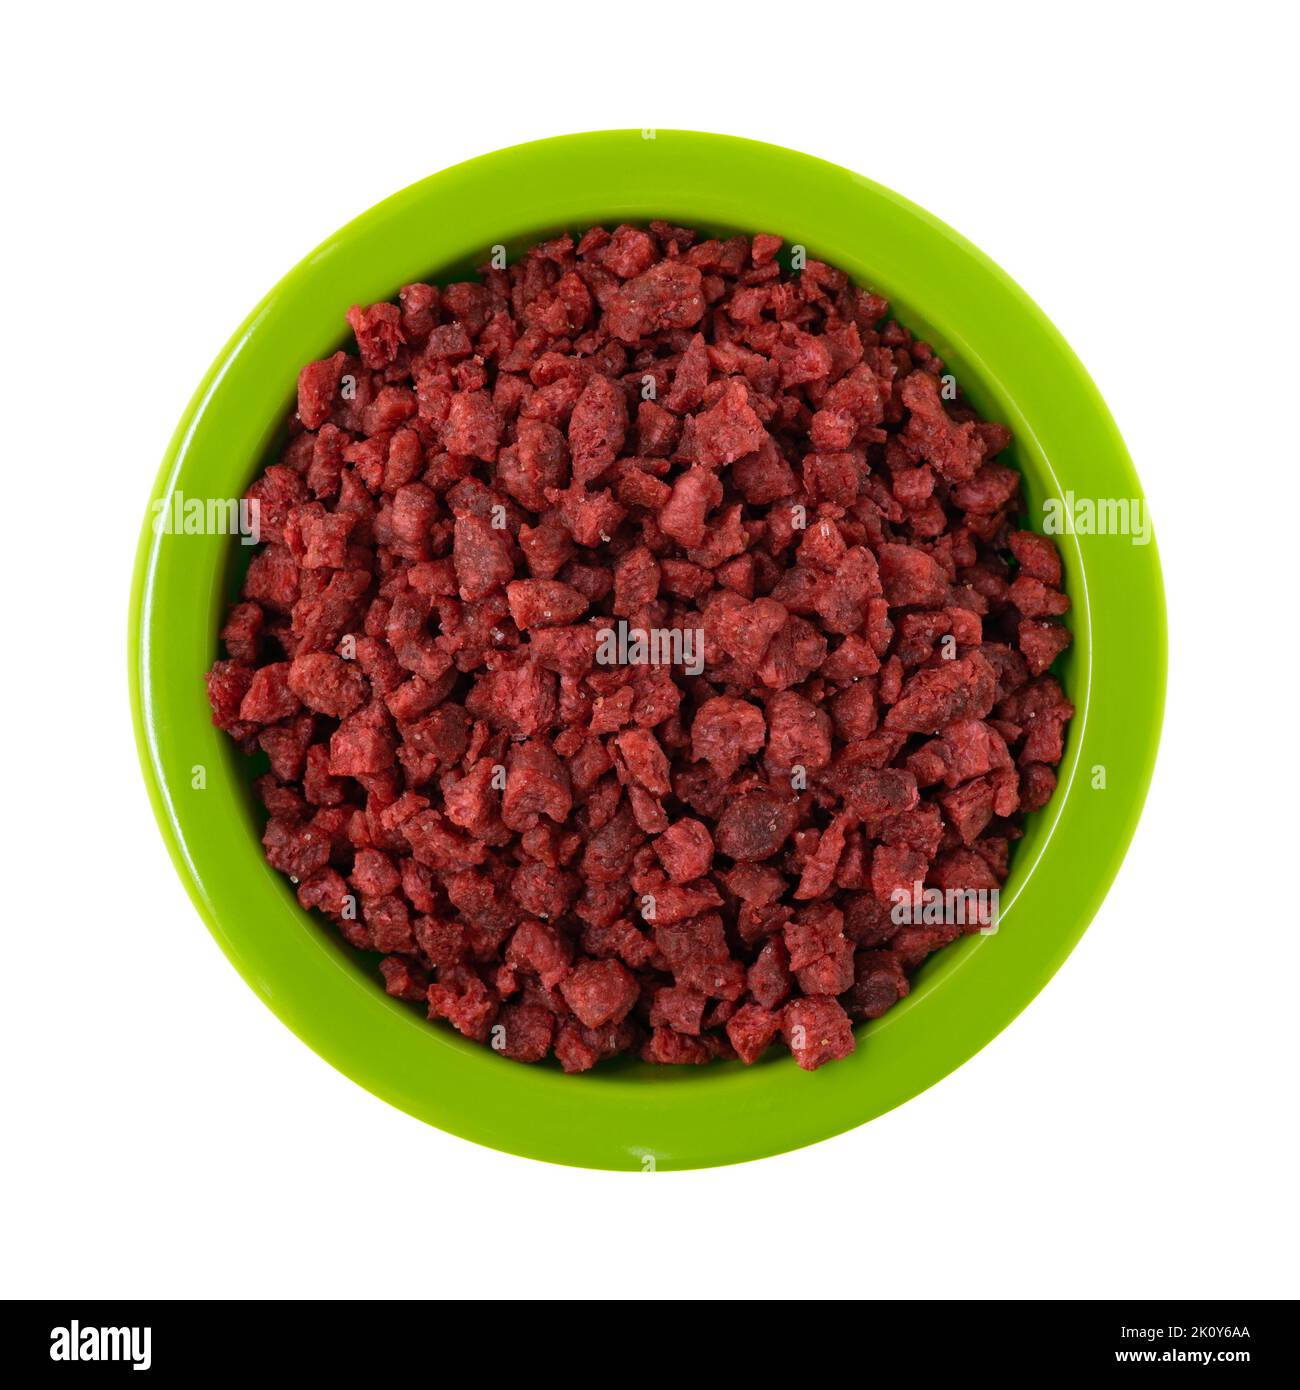 Overhead view of a green bowl filled with imitation bacon bits isolated on a white background. Stock Photo